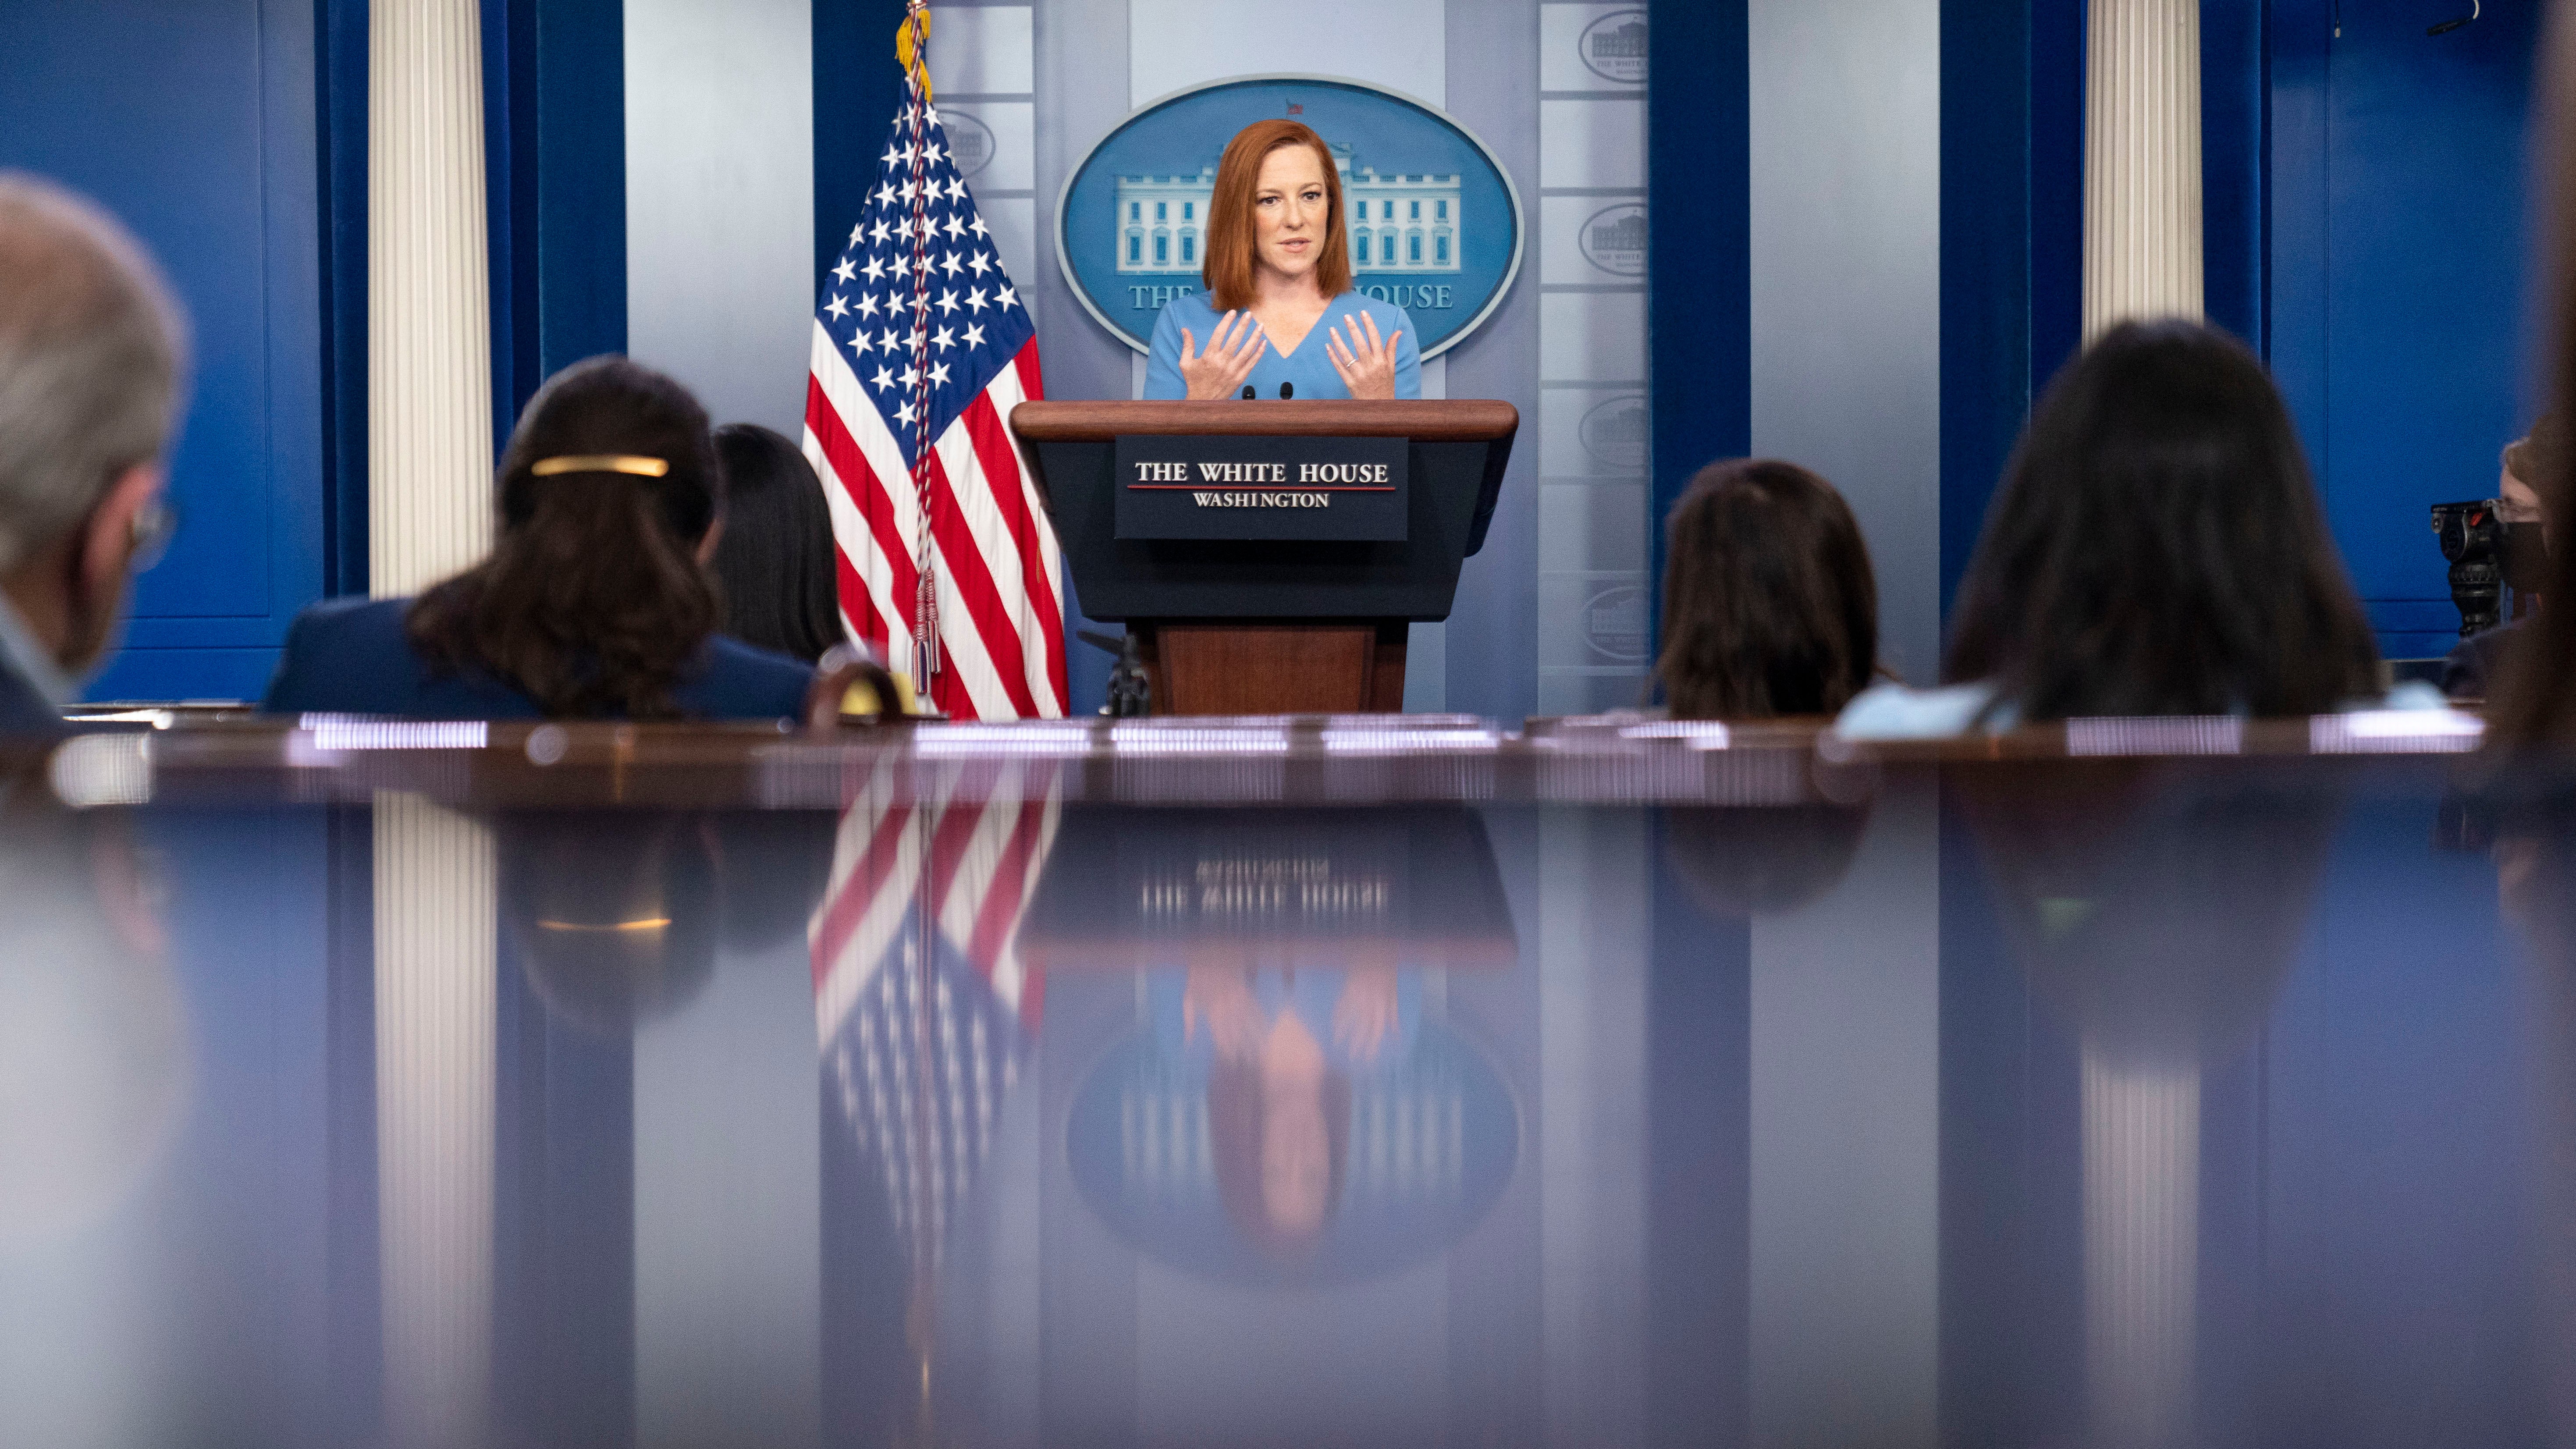 Reporter roster Psaki: How are more abortions in minority communities ‘fair’?